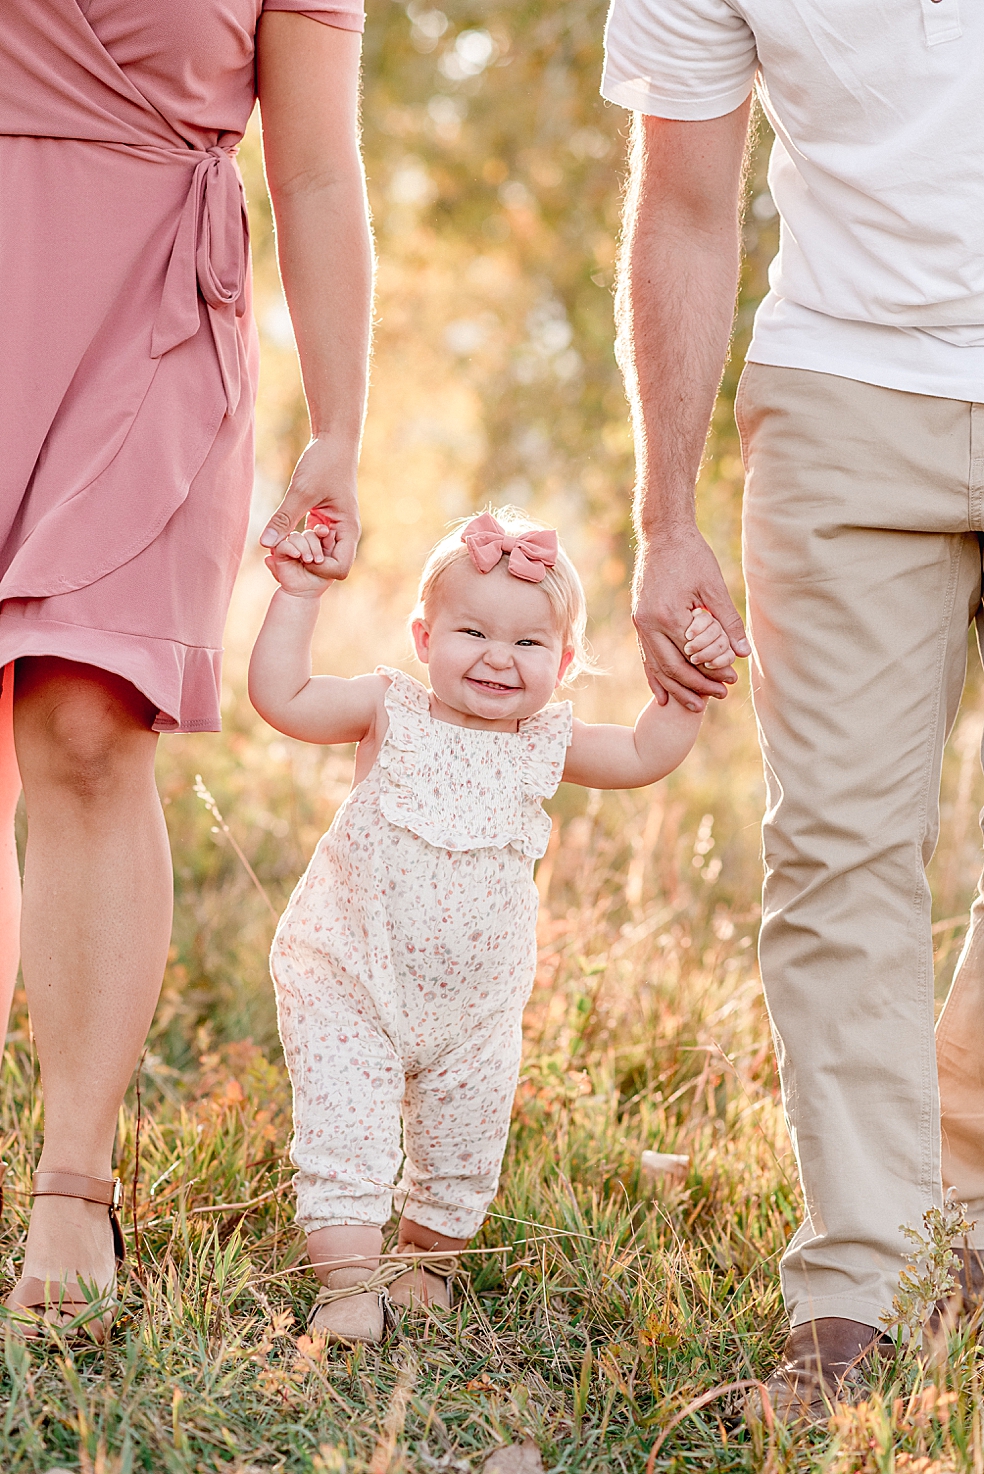 Toddler girl walking in a field with mom and dad | Photo by Jessica Lee Photography